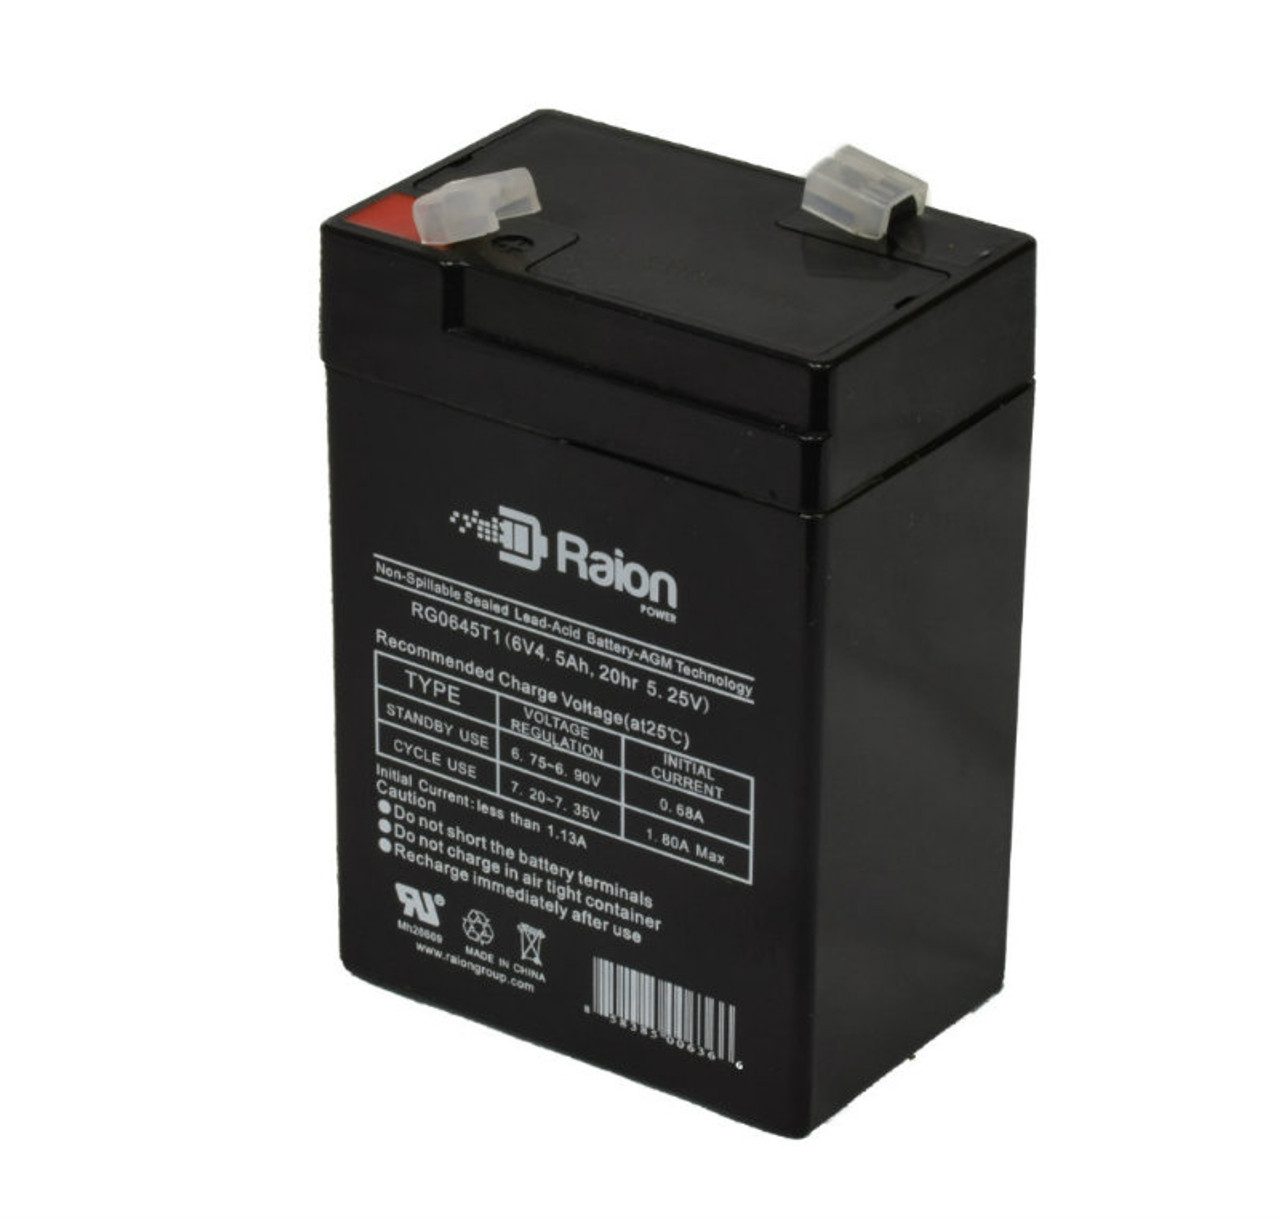 Raion Power RG0645T1 6V 4.5Ah Replacement Battery Cartridge for Edwards 1799-108PT